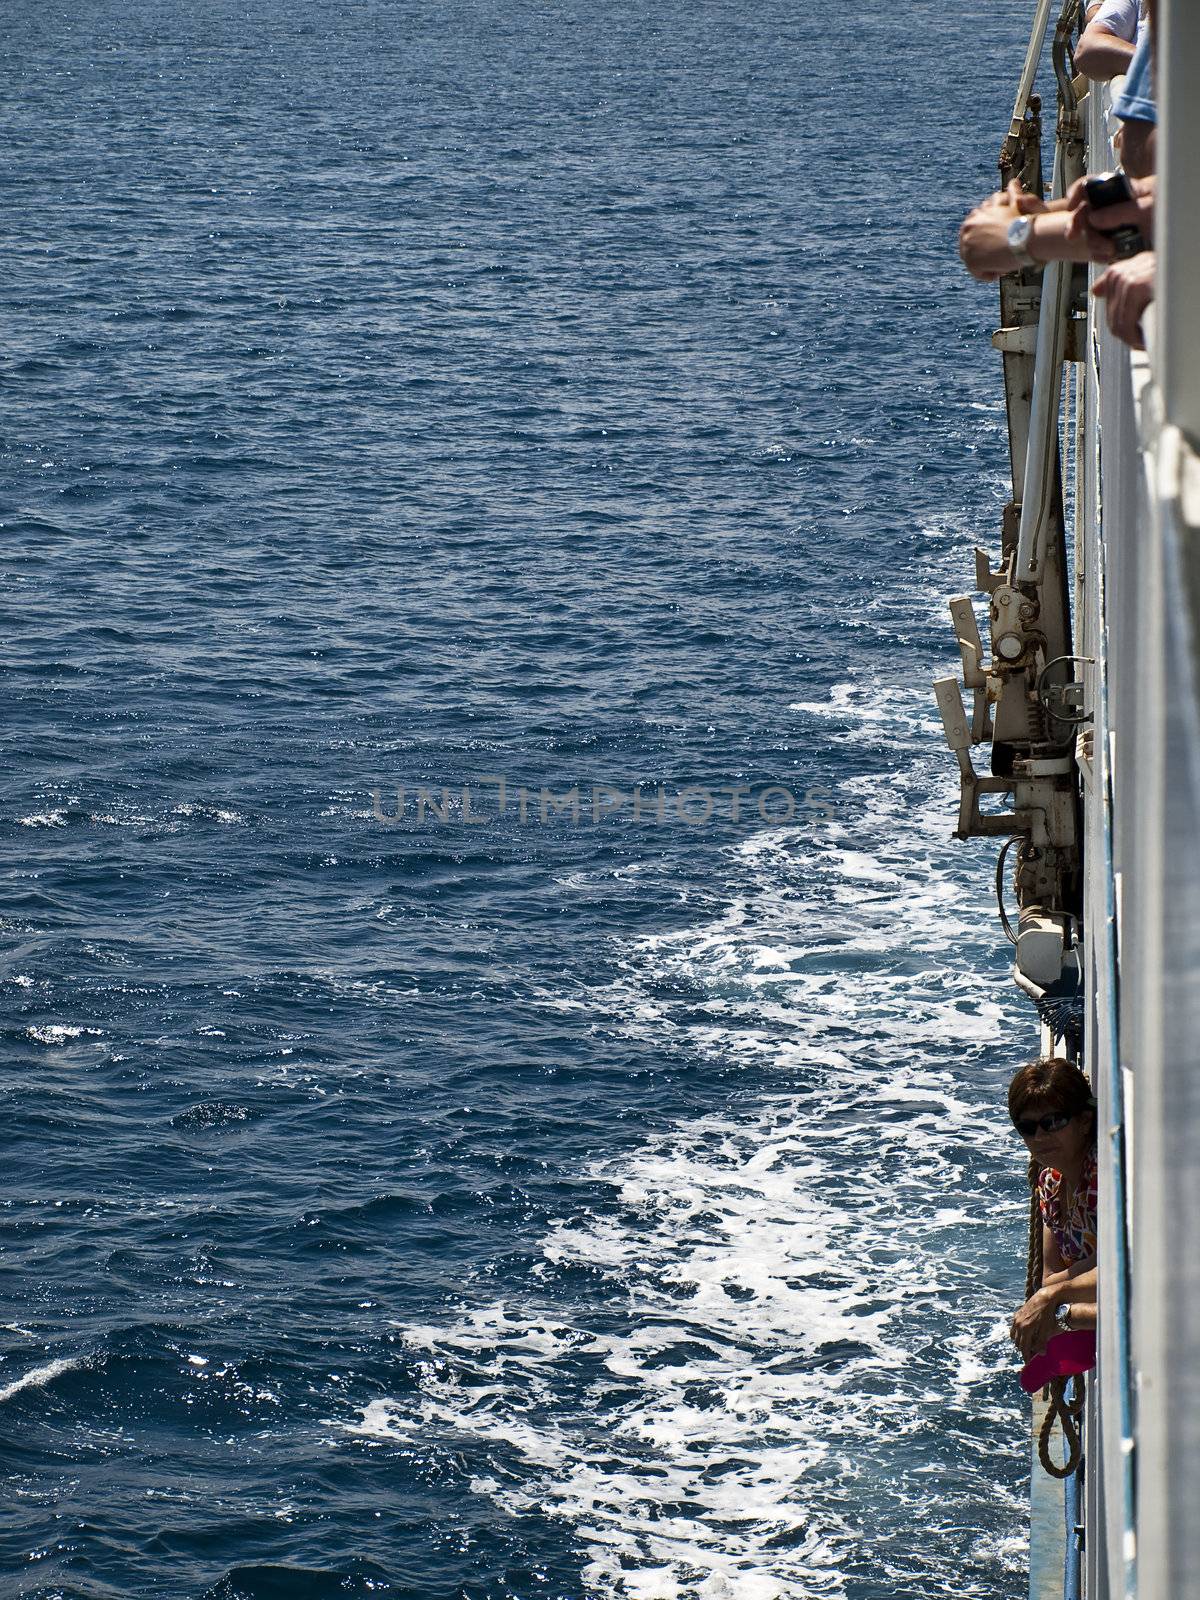 Passengers having a look overboard on the ferry boat service between Malta and sister island Gozo